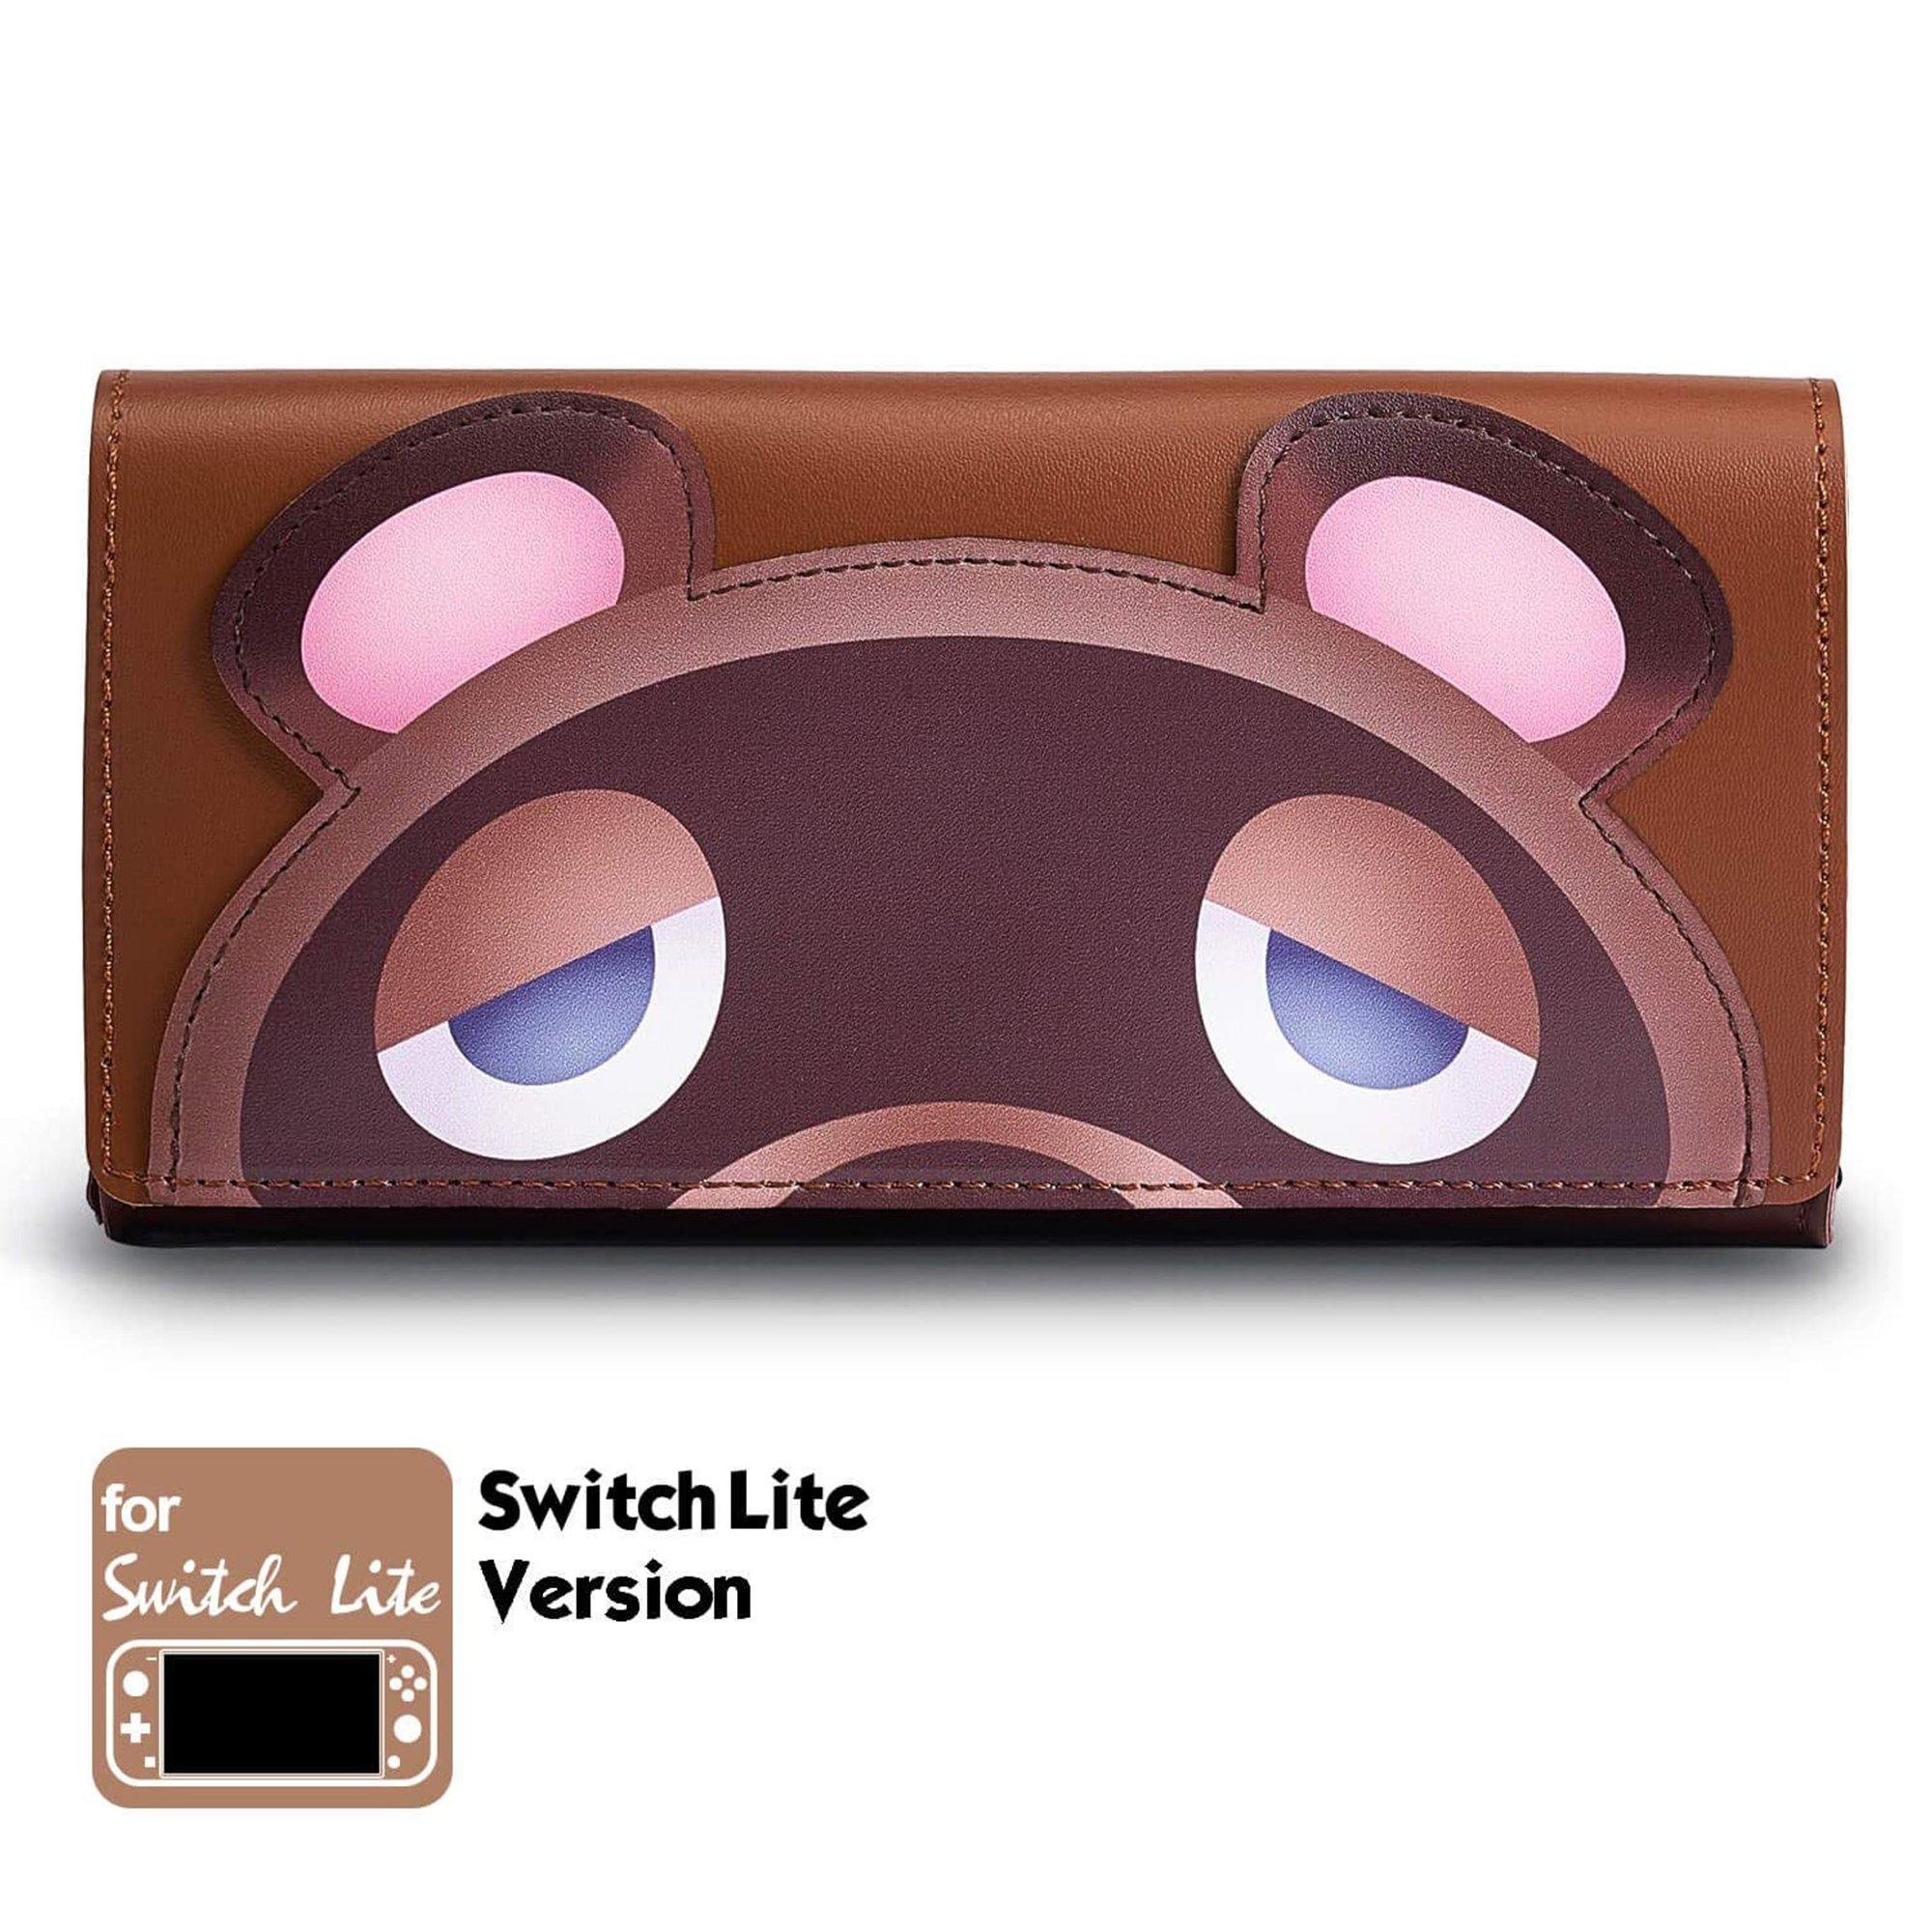 Tom Nook Carrying Case For Nintendo Switch Lite